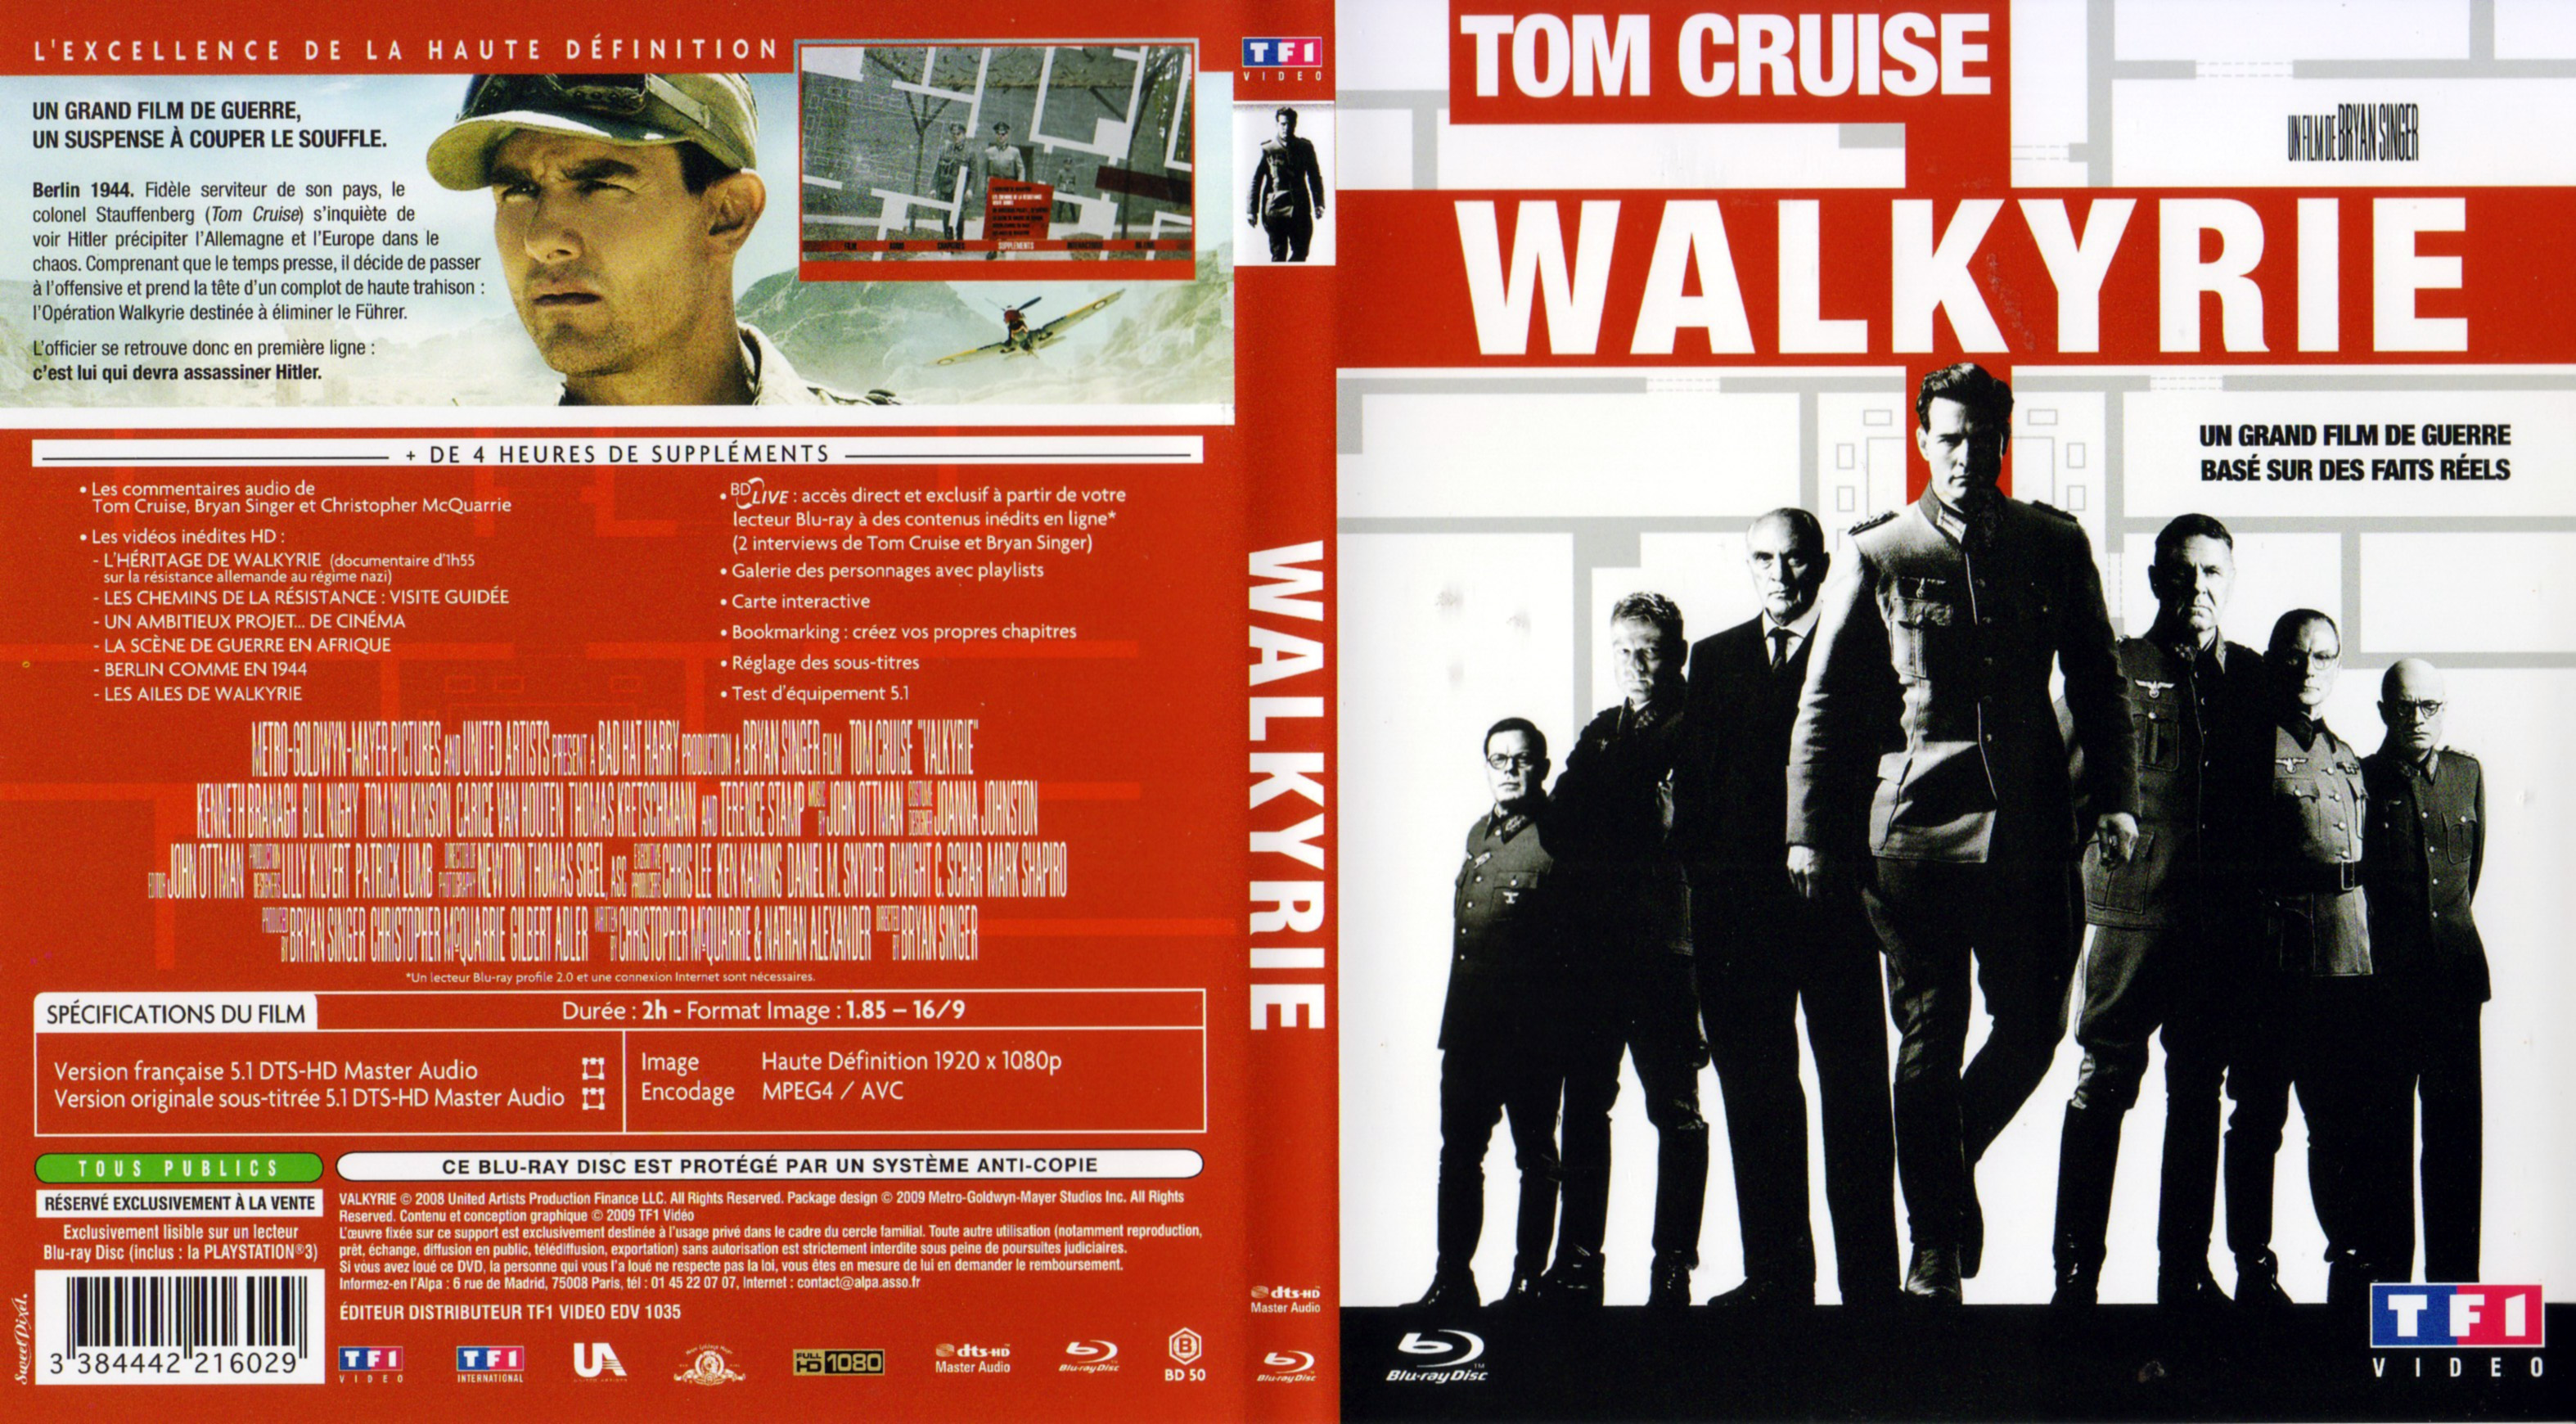 Jaquette DVD Walkyrie (BLU-RAY)